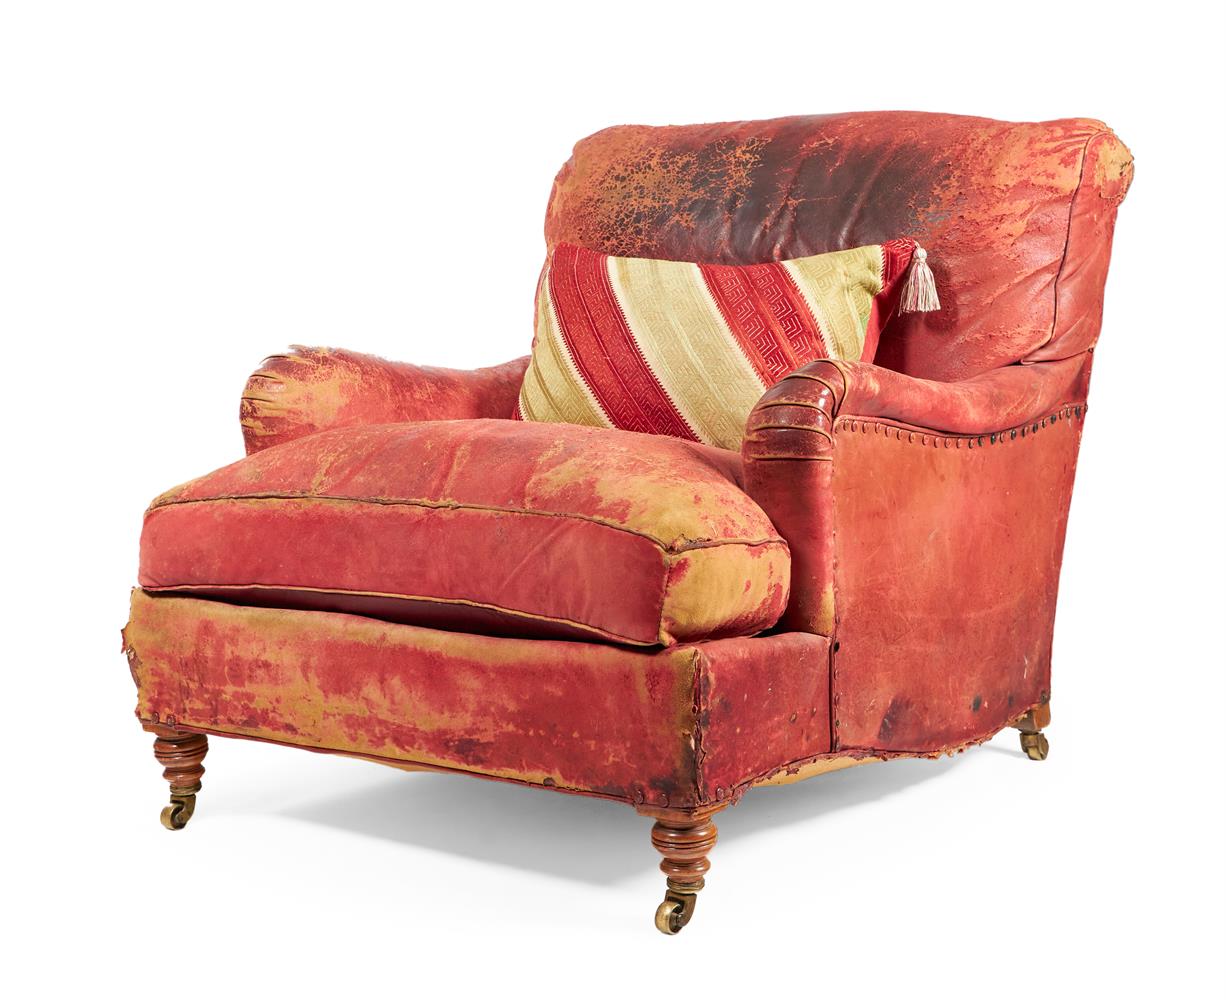 A LATE VICTORIAN WALNUT AND RED LEATHER ARMCHAIR BY HOWARD & SONS, LATE 19TH/EARLY 20TH CENTURY - Image 2 of 5